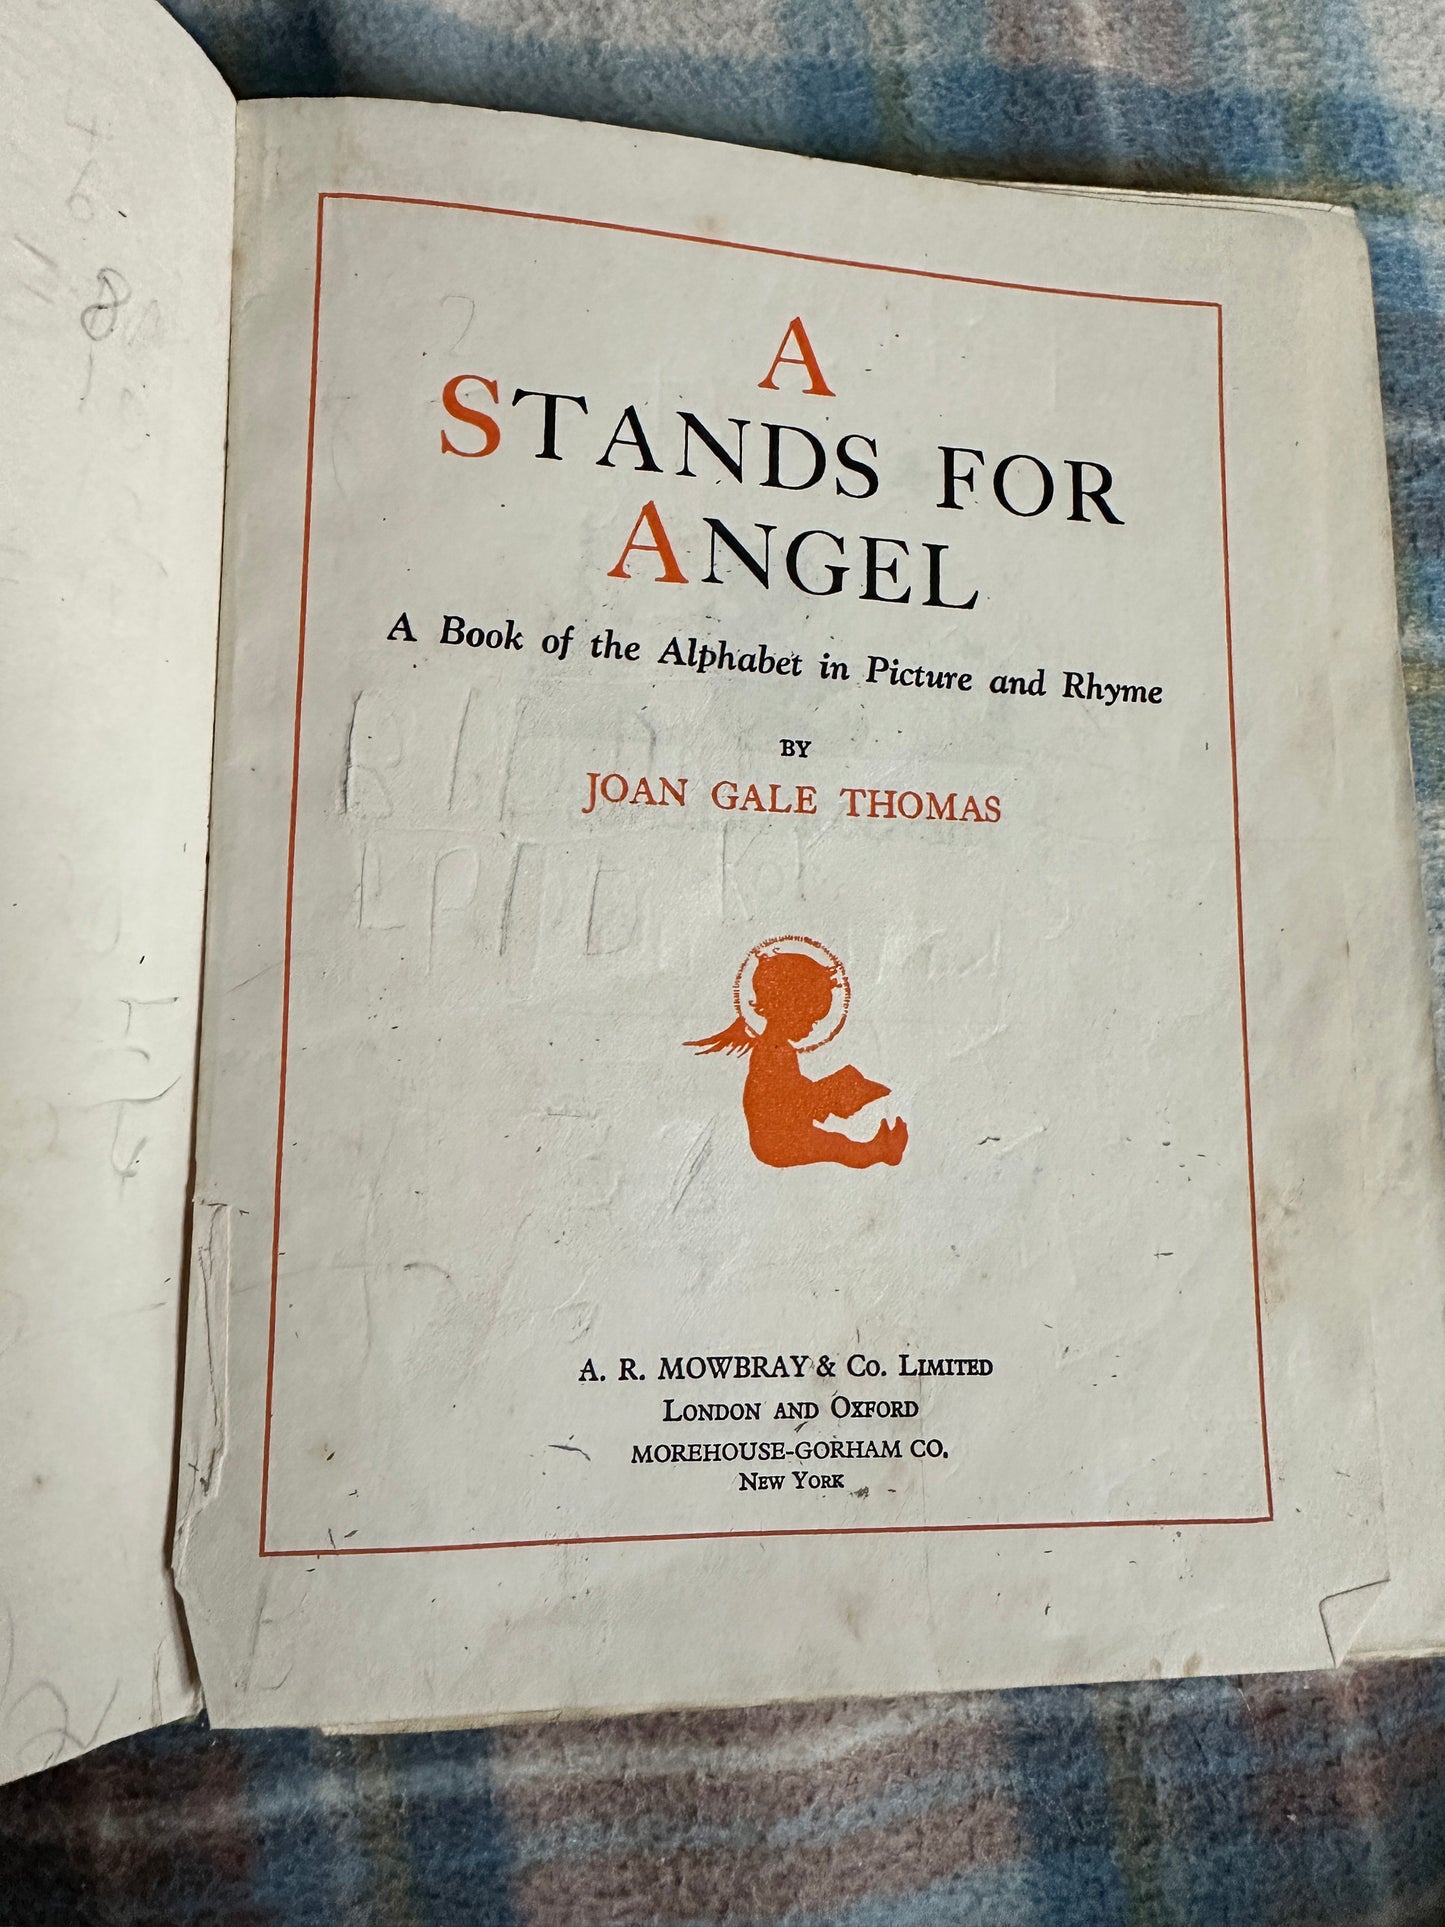 1951 A Stands For Angel - John Gale Thomas(A.R. Mowbray & Co Ltd)